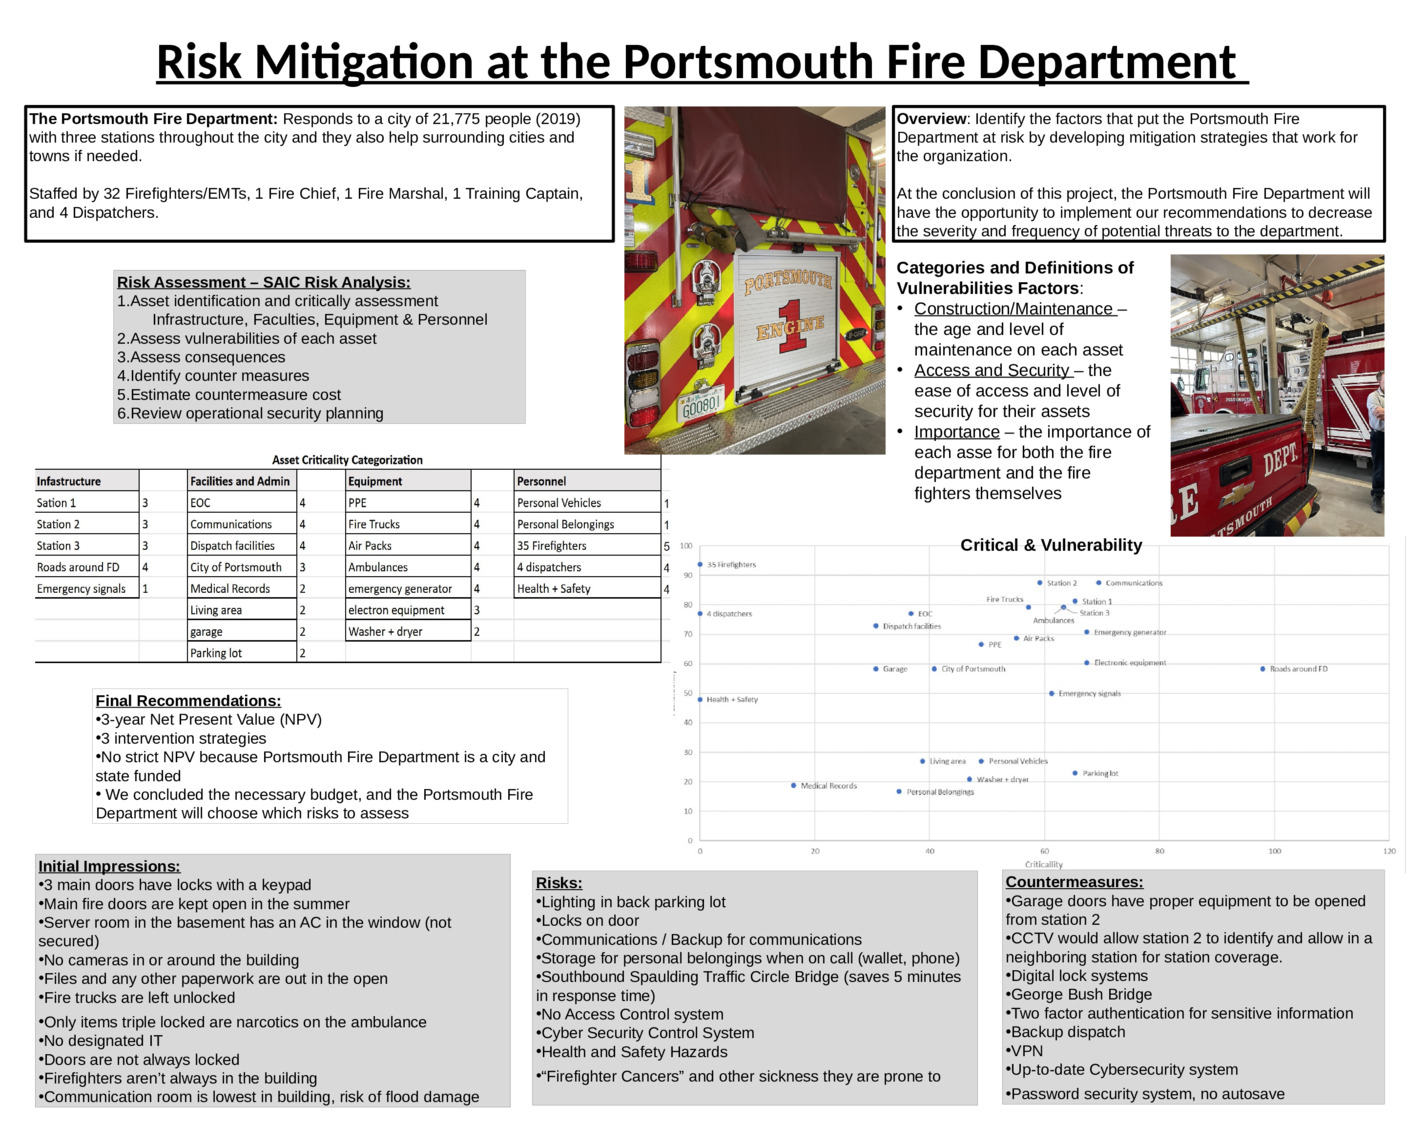 Risk Mitigation At The Portsmouth Fire Department by danieldiffer